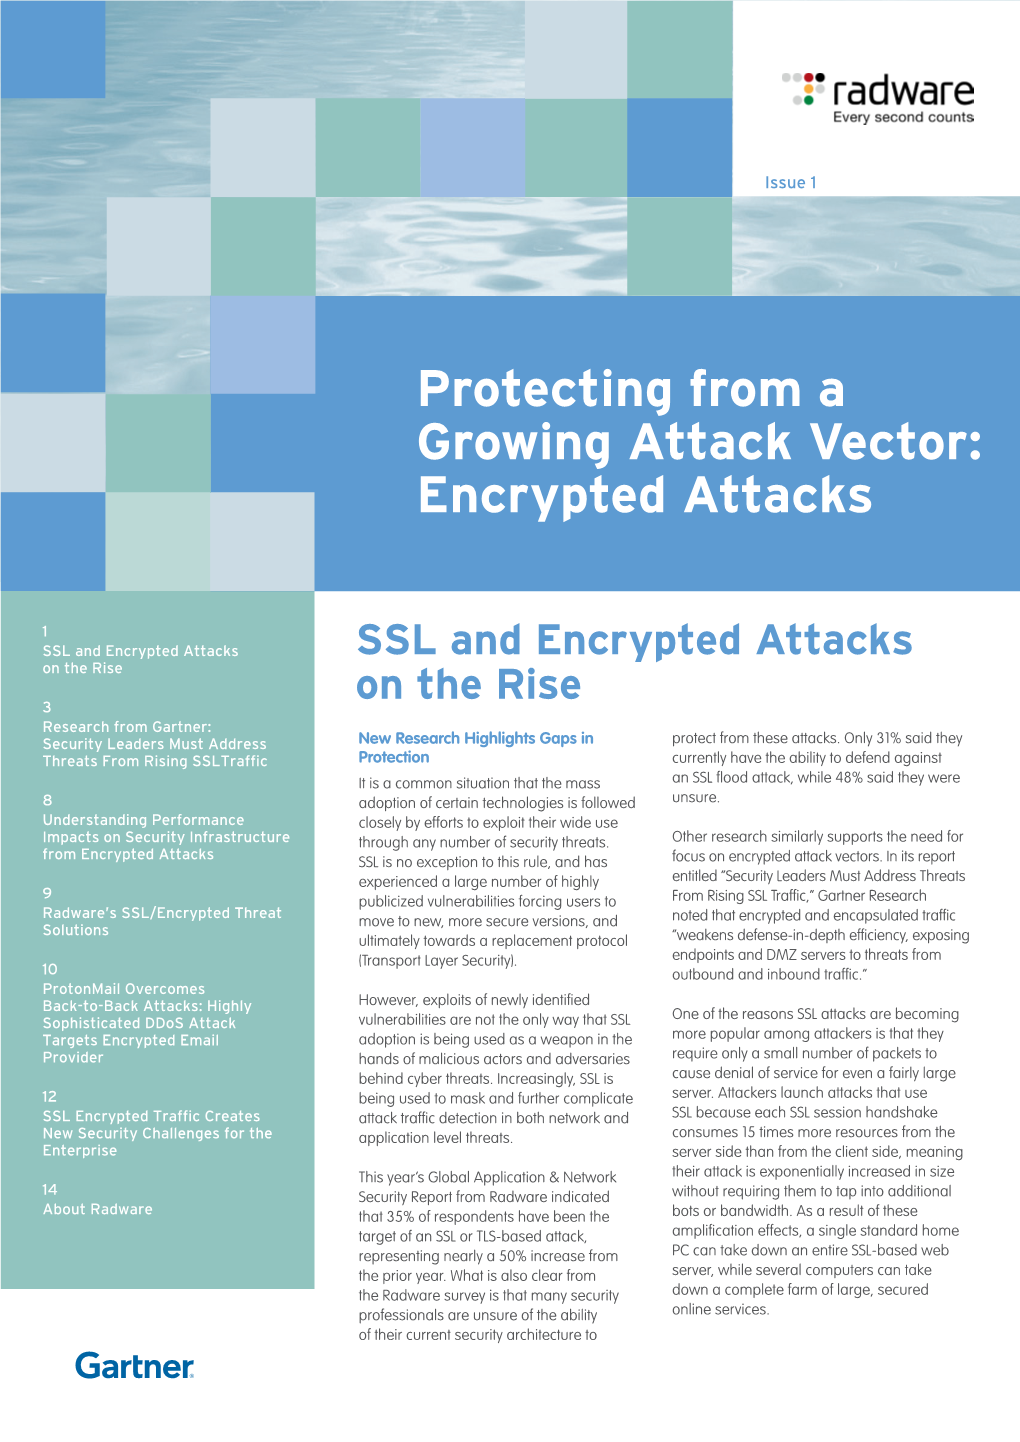 Protecting from a Growing Attack Vector: Encrypted Attacks